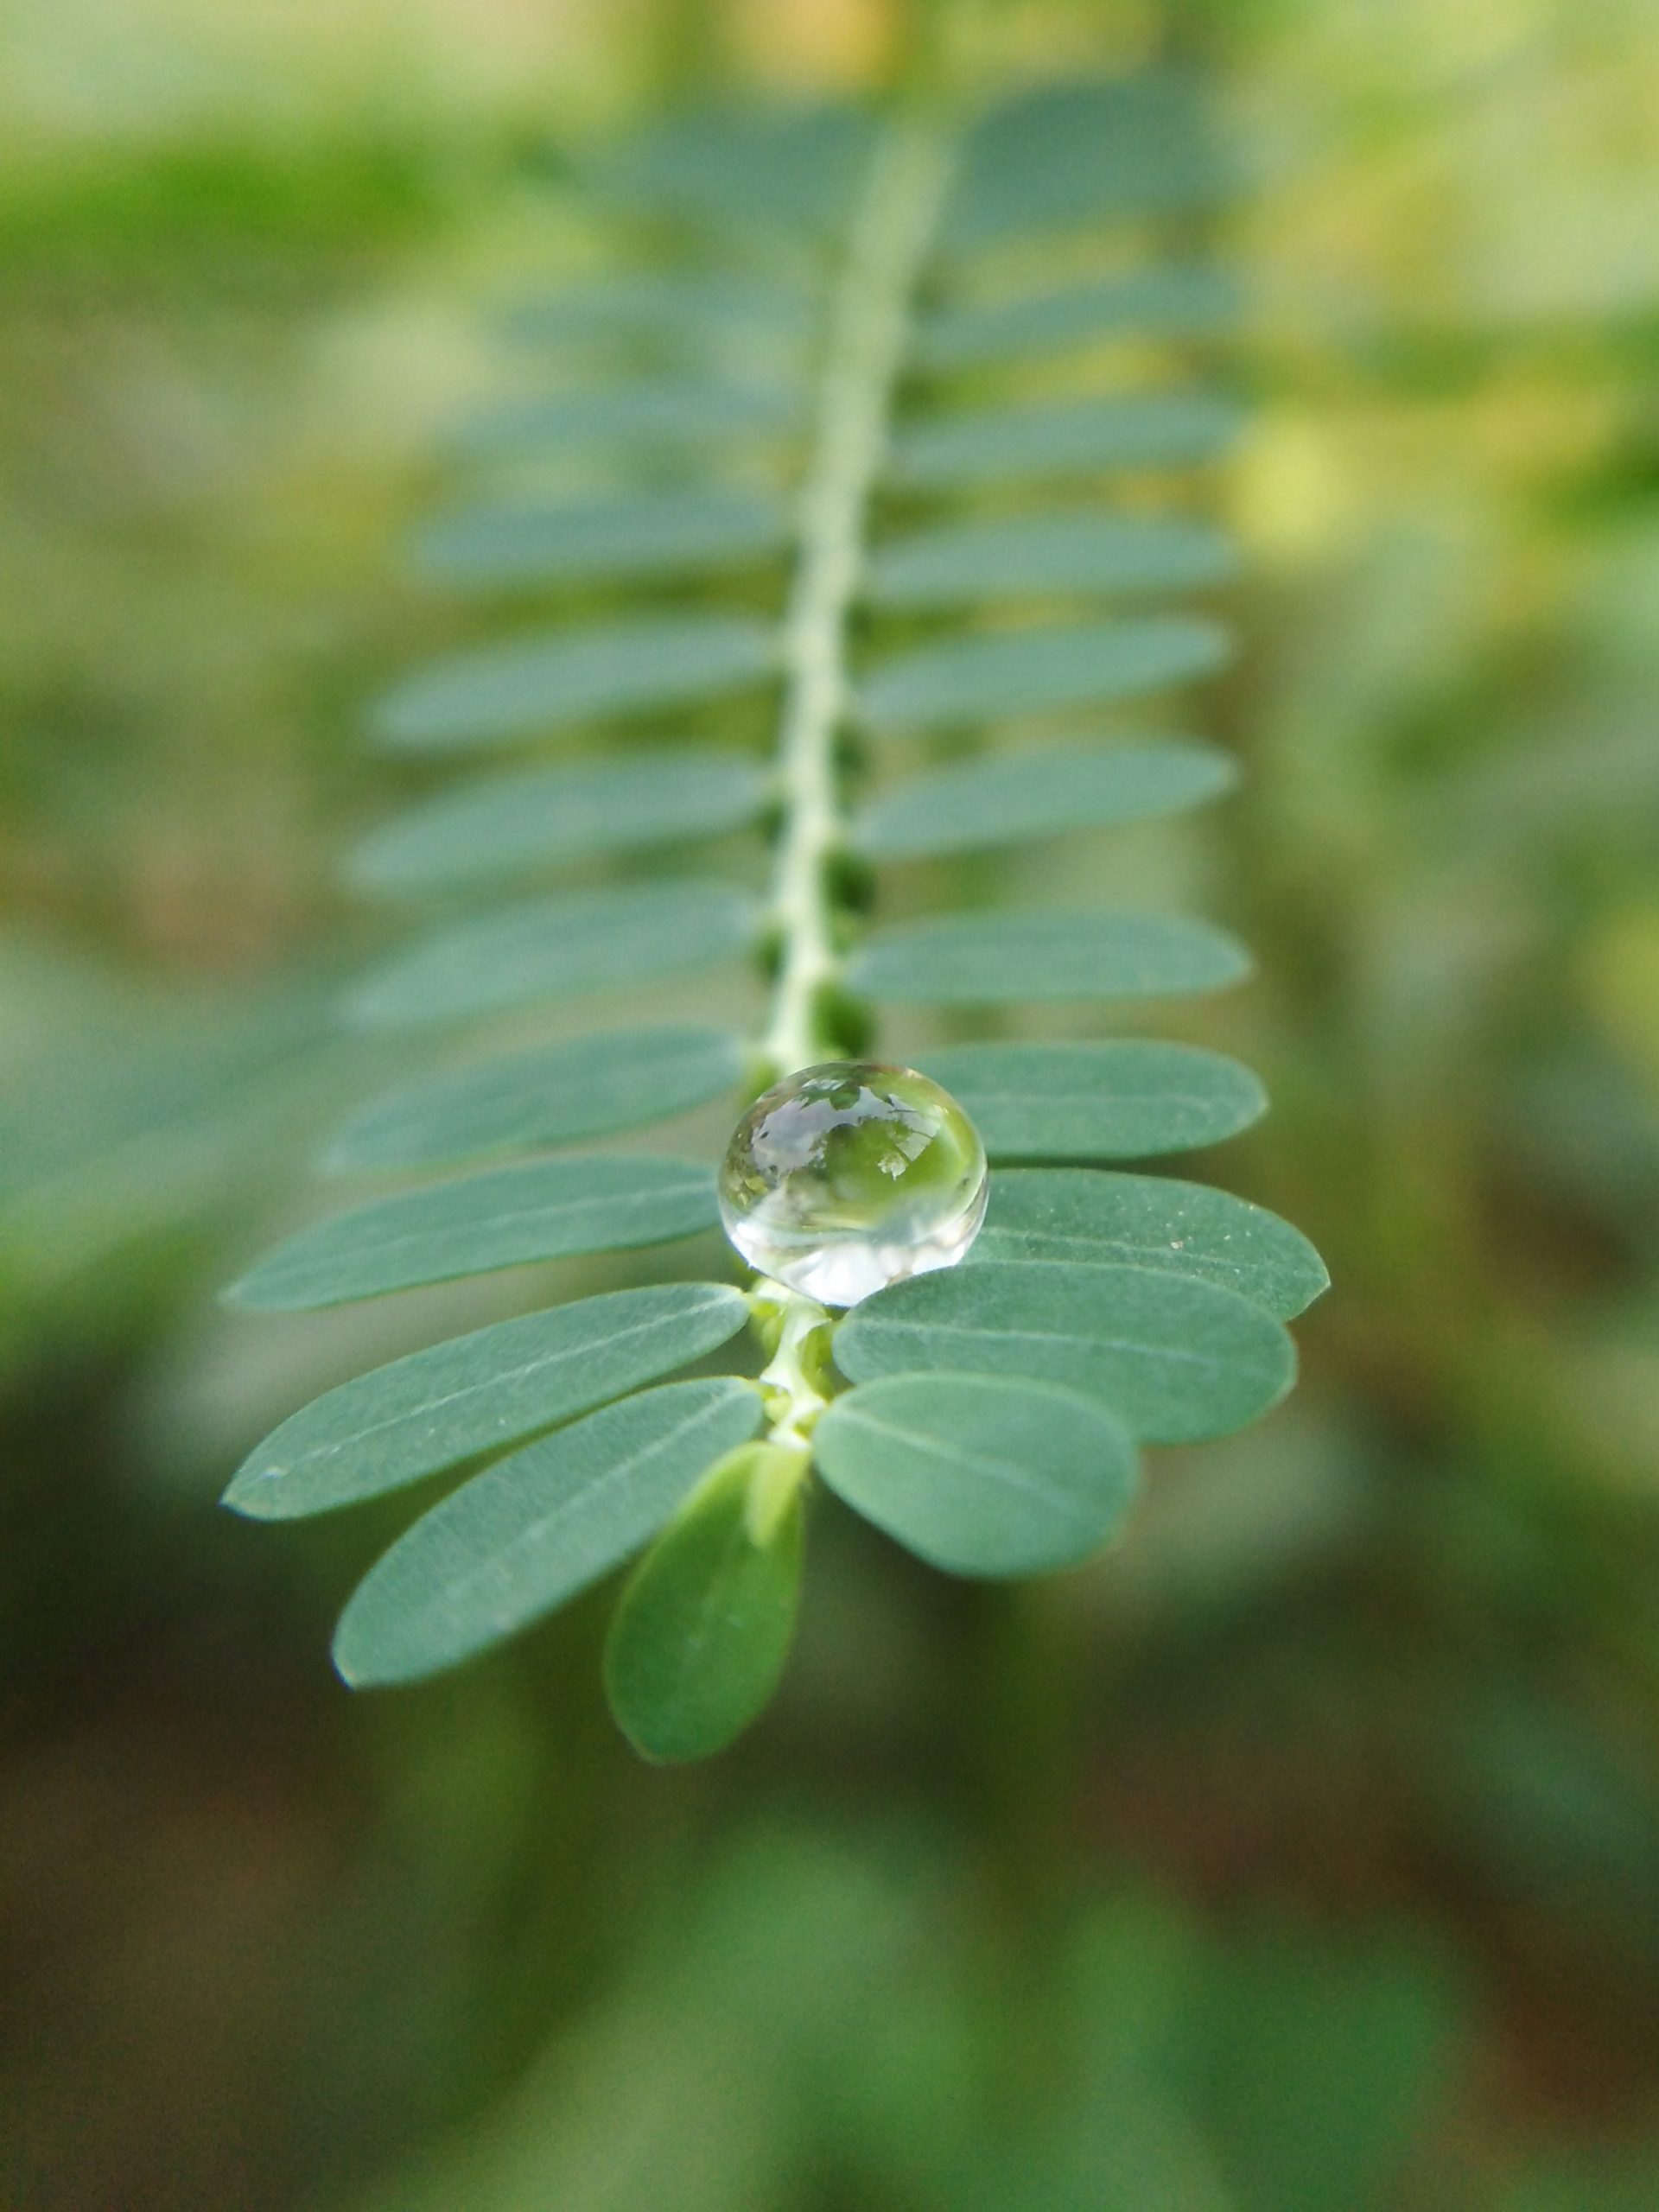 Water drops on a plant leaves